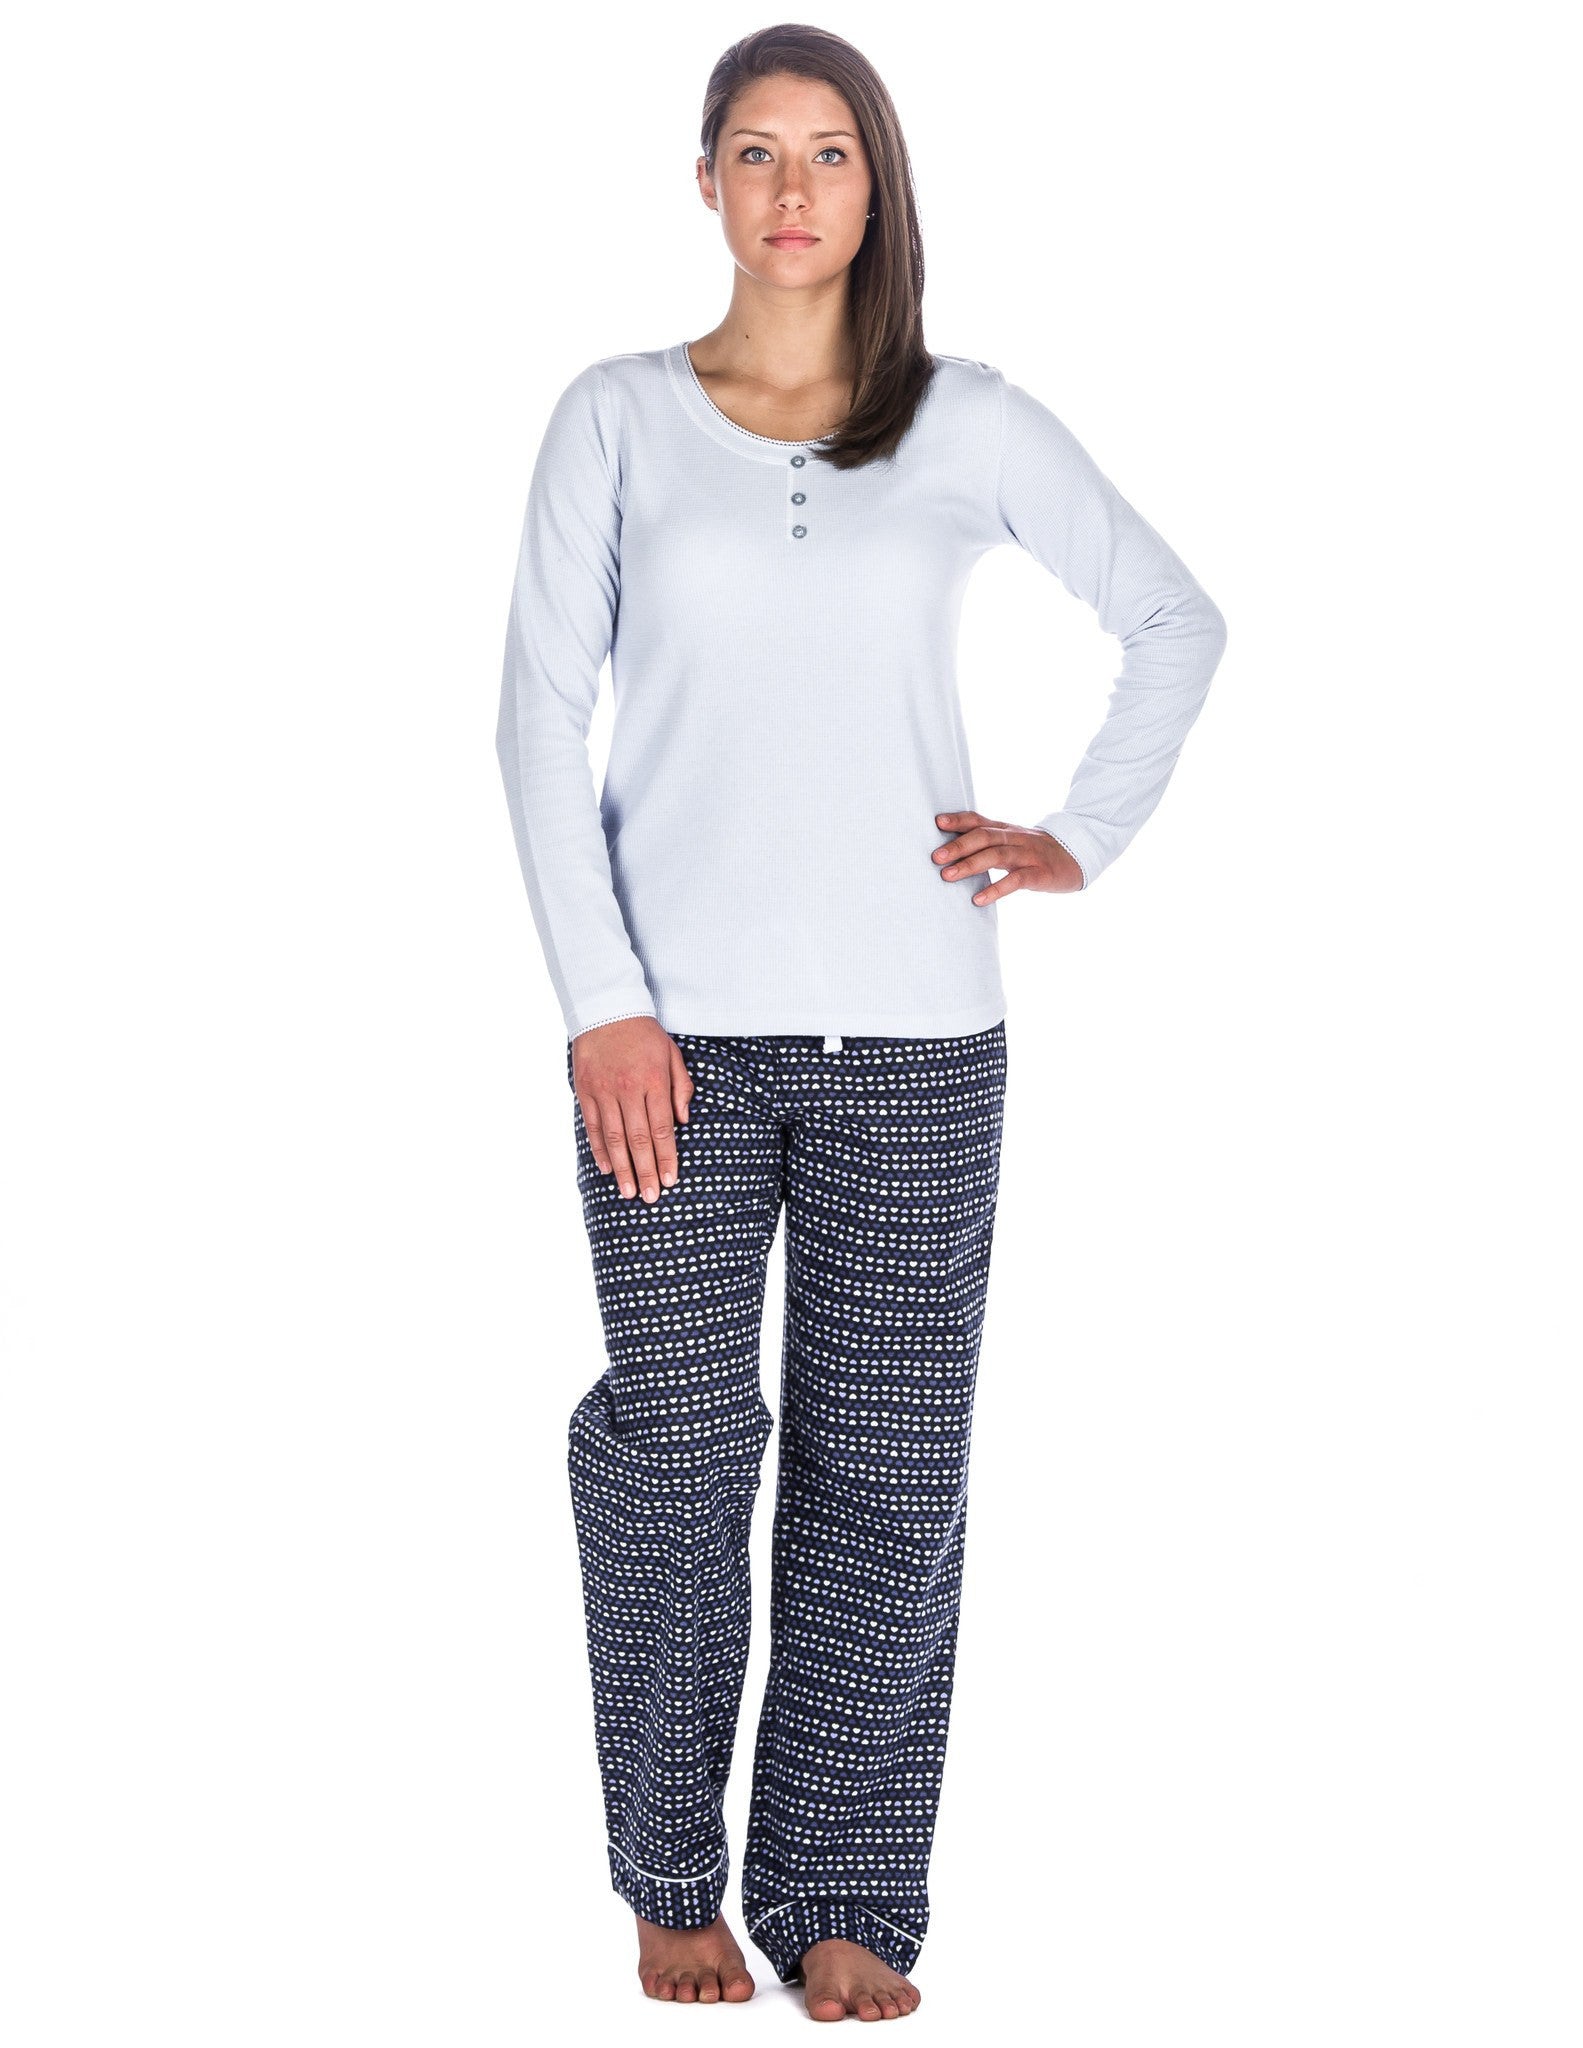 Relaxed Fit Women's Cotton Flannel Lounge Set with Crew Neck Top